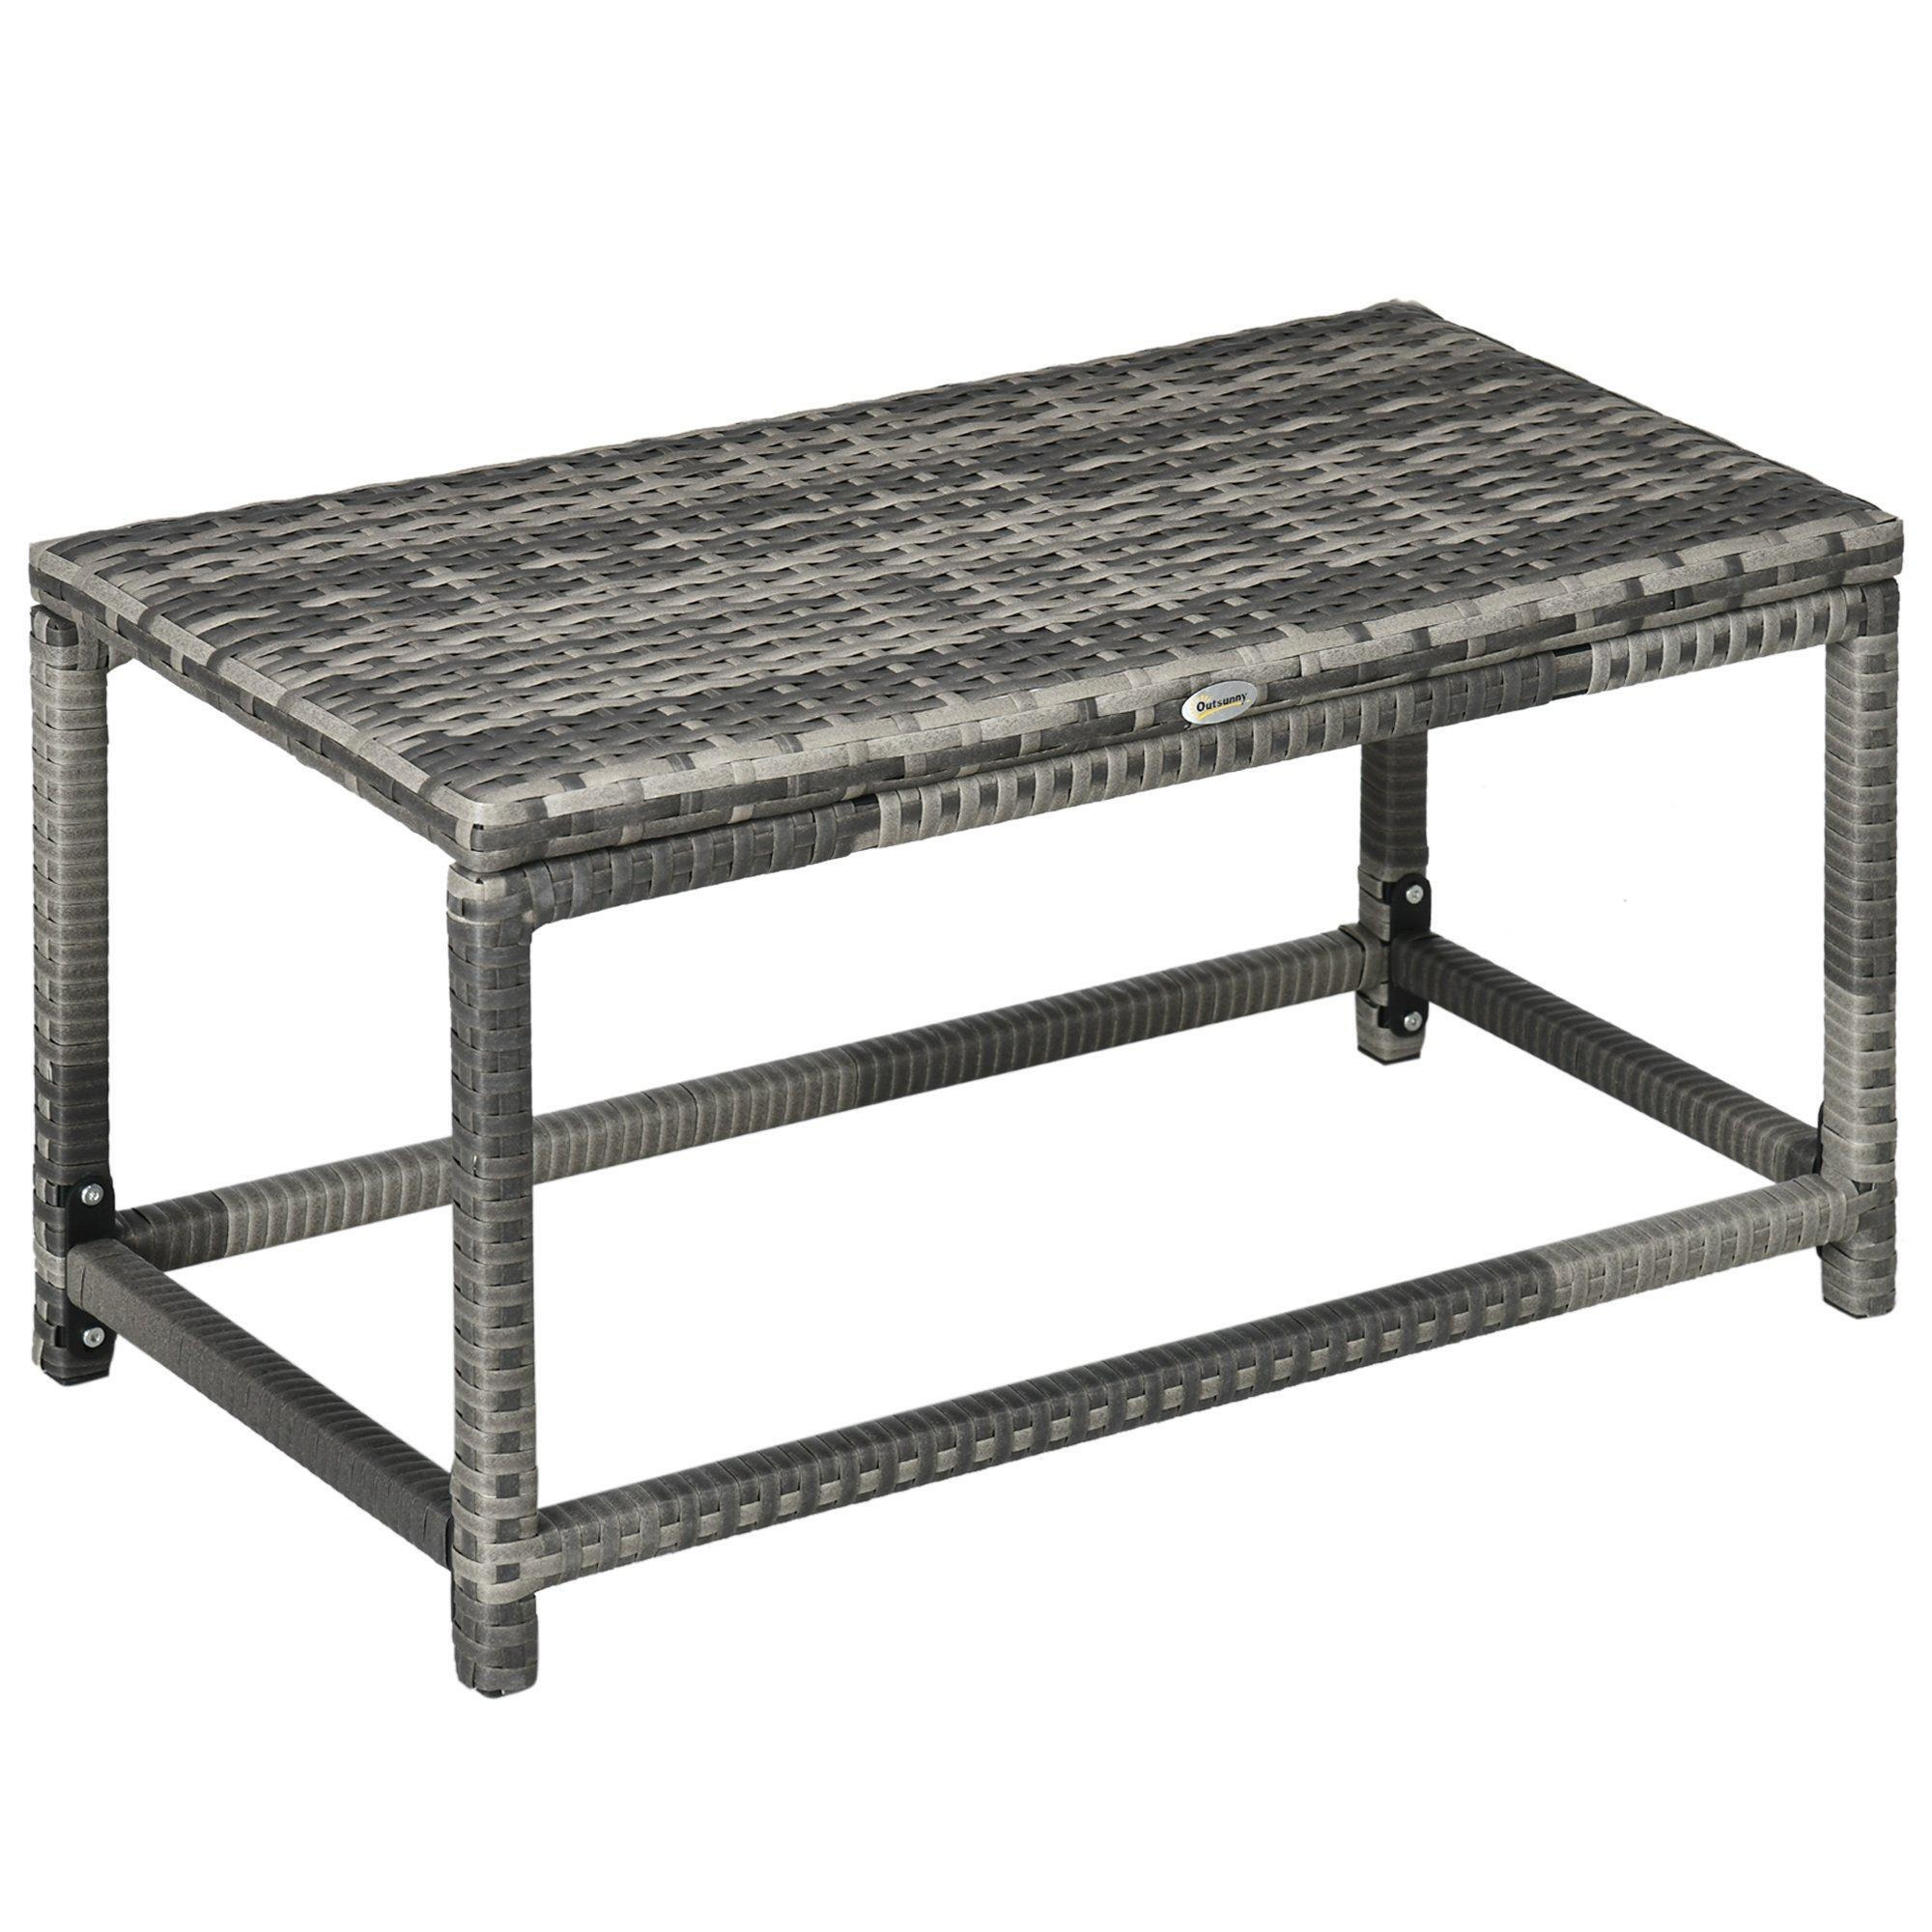 Outdoor Coffee Table w/ Plastic Board Under the Full Woven Table Top, Grey - image 1